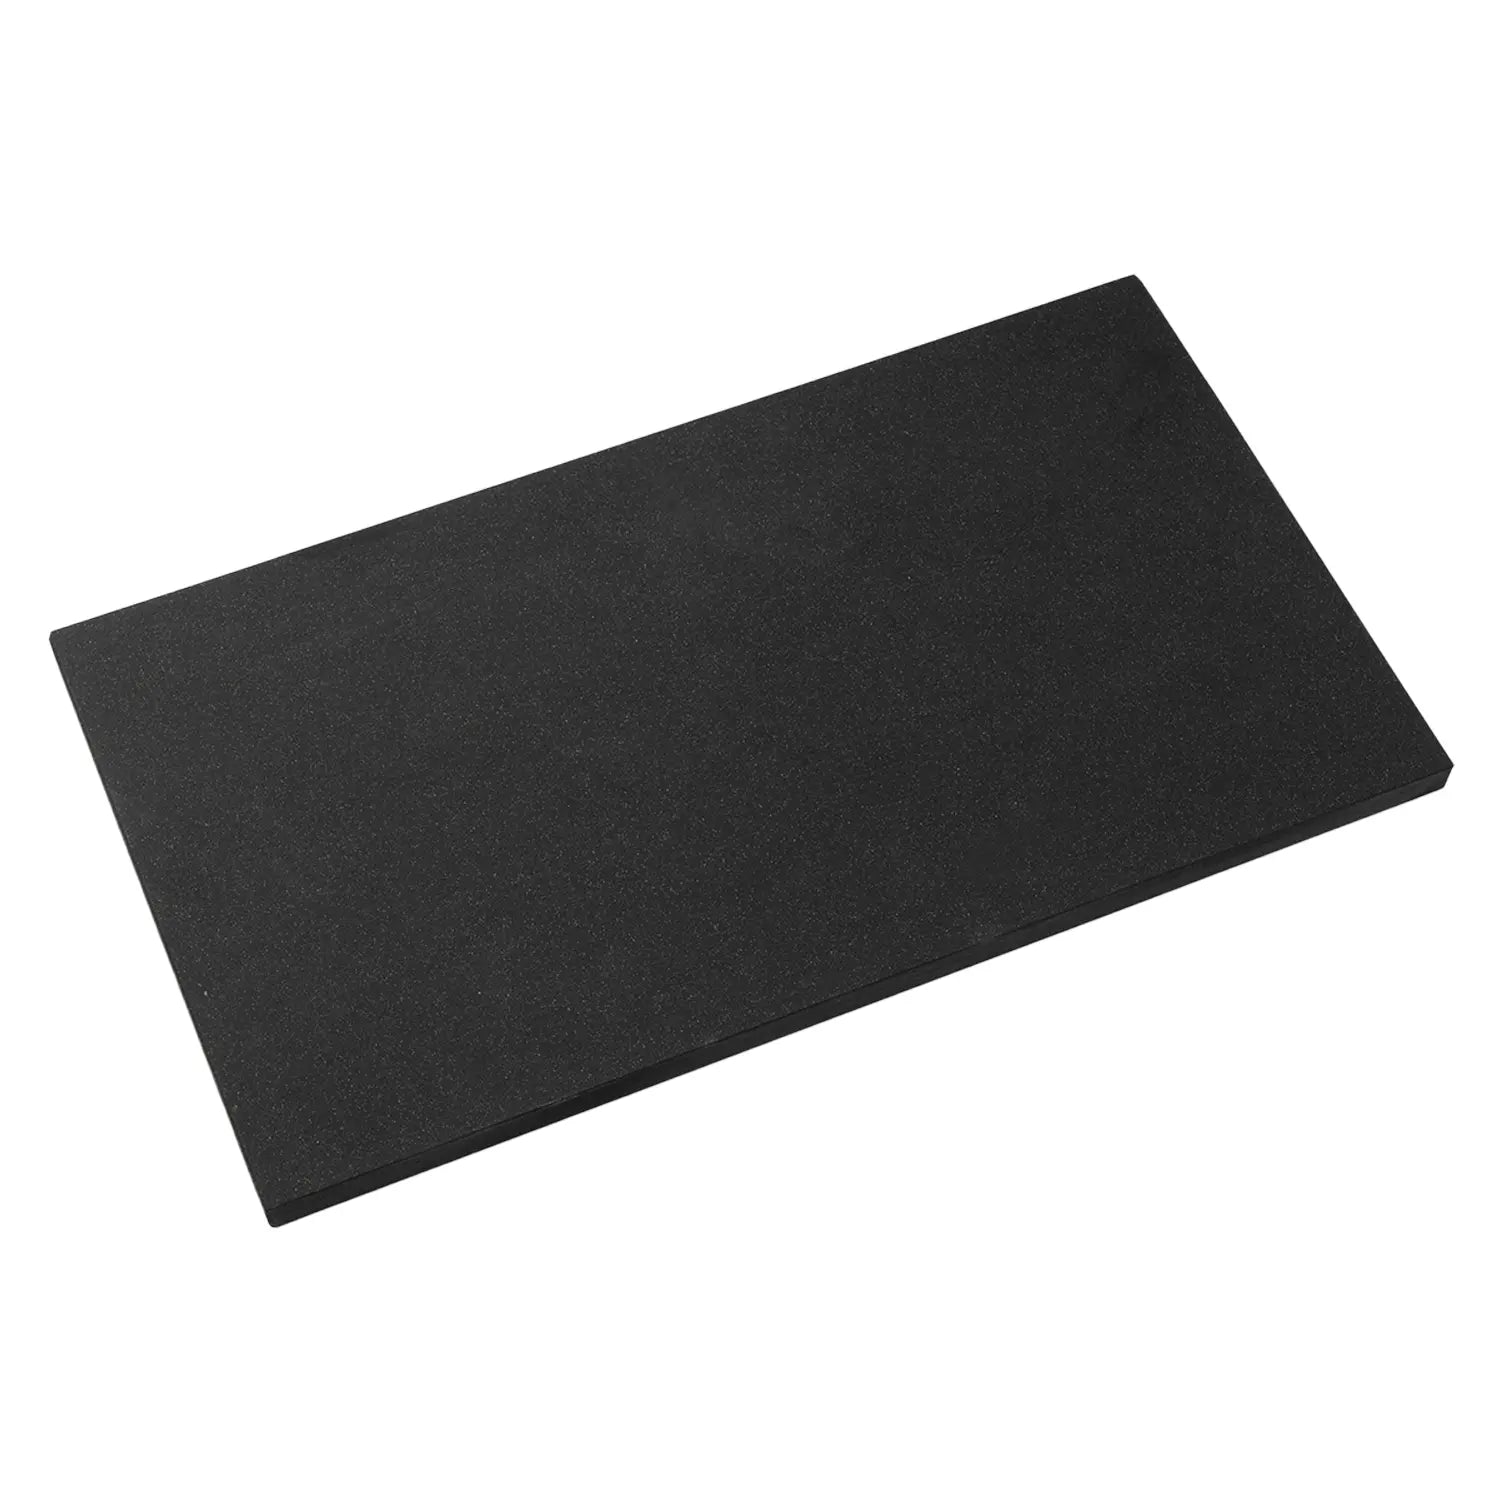 SYNTHETIC RUBBER CUTTING BOARD M 38X 21X1.3 POPULAR AMONG CHEFS MADE IN  JAPAN